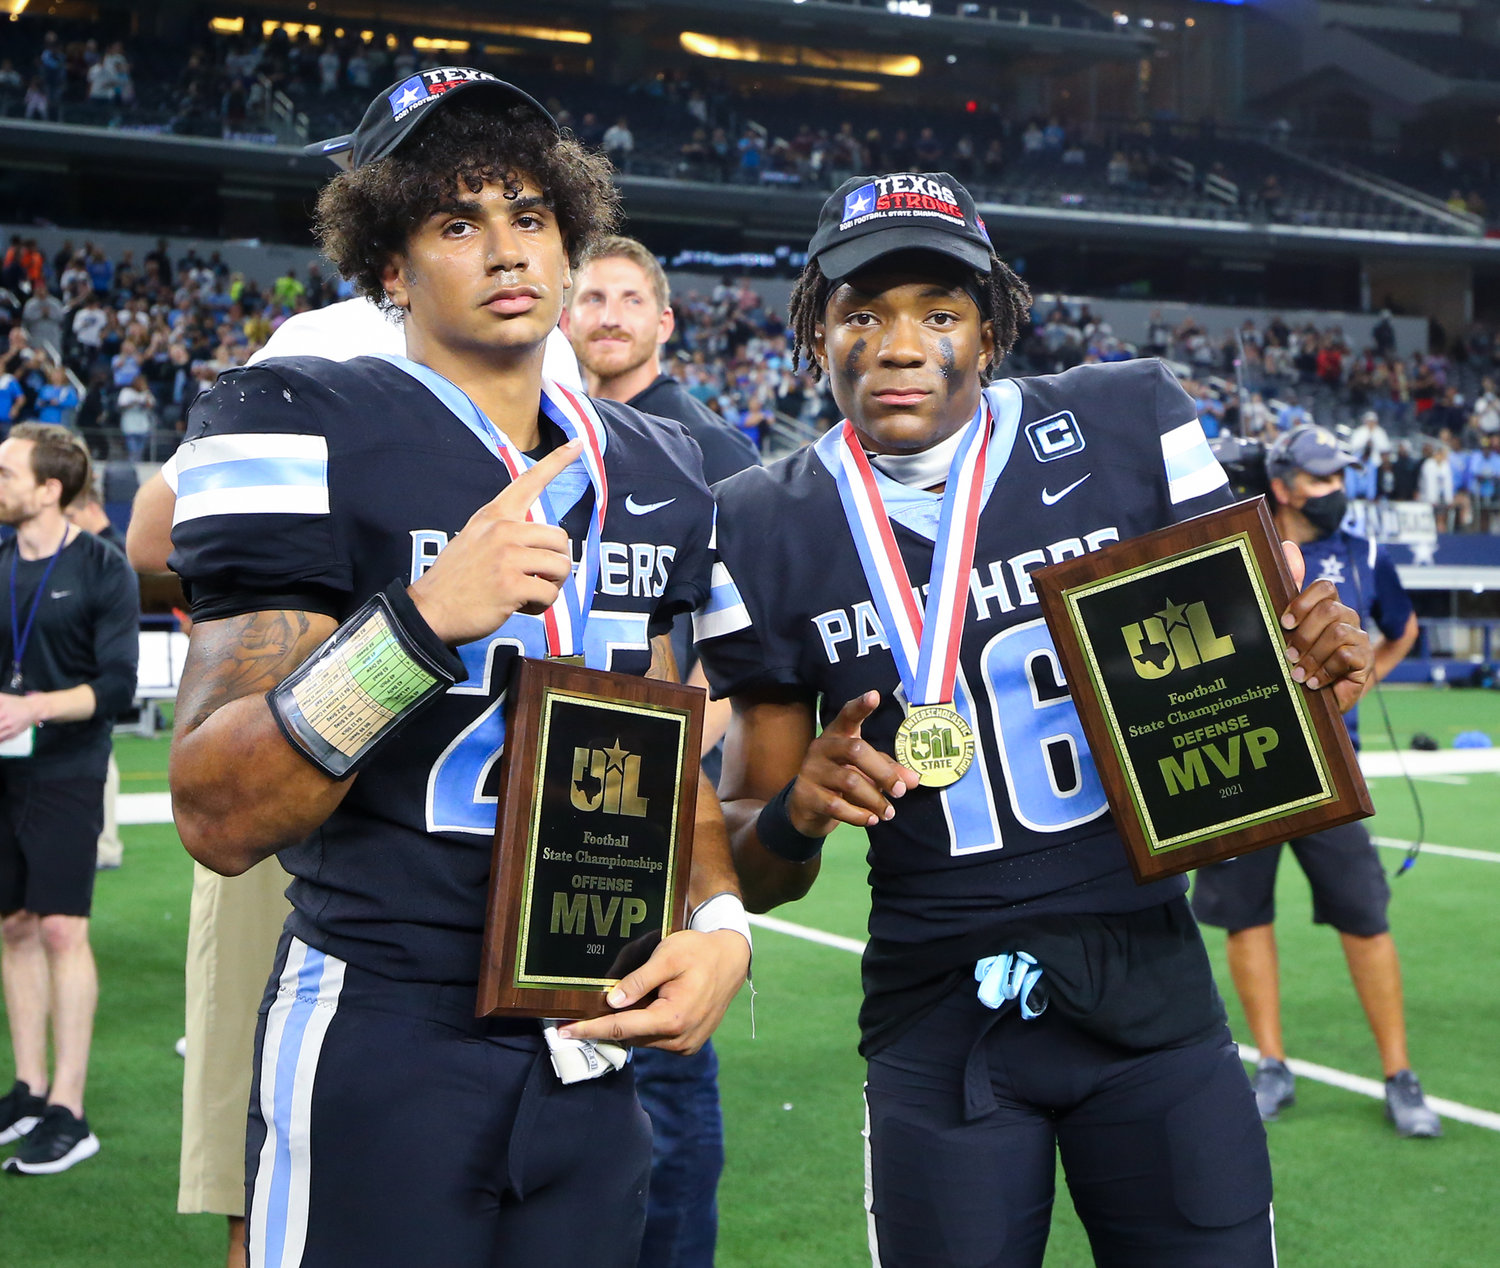 Kentrell Webb and Jacob Brown were named defensive and offensive MVPS in Paetow's a 27-24 win over College Station in the Class 5A Division I state football championship game on December 17, 2021 in Arlington, Texas.